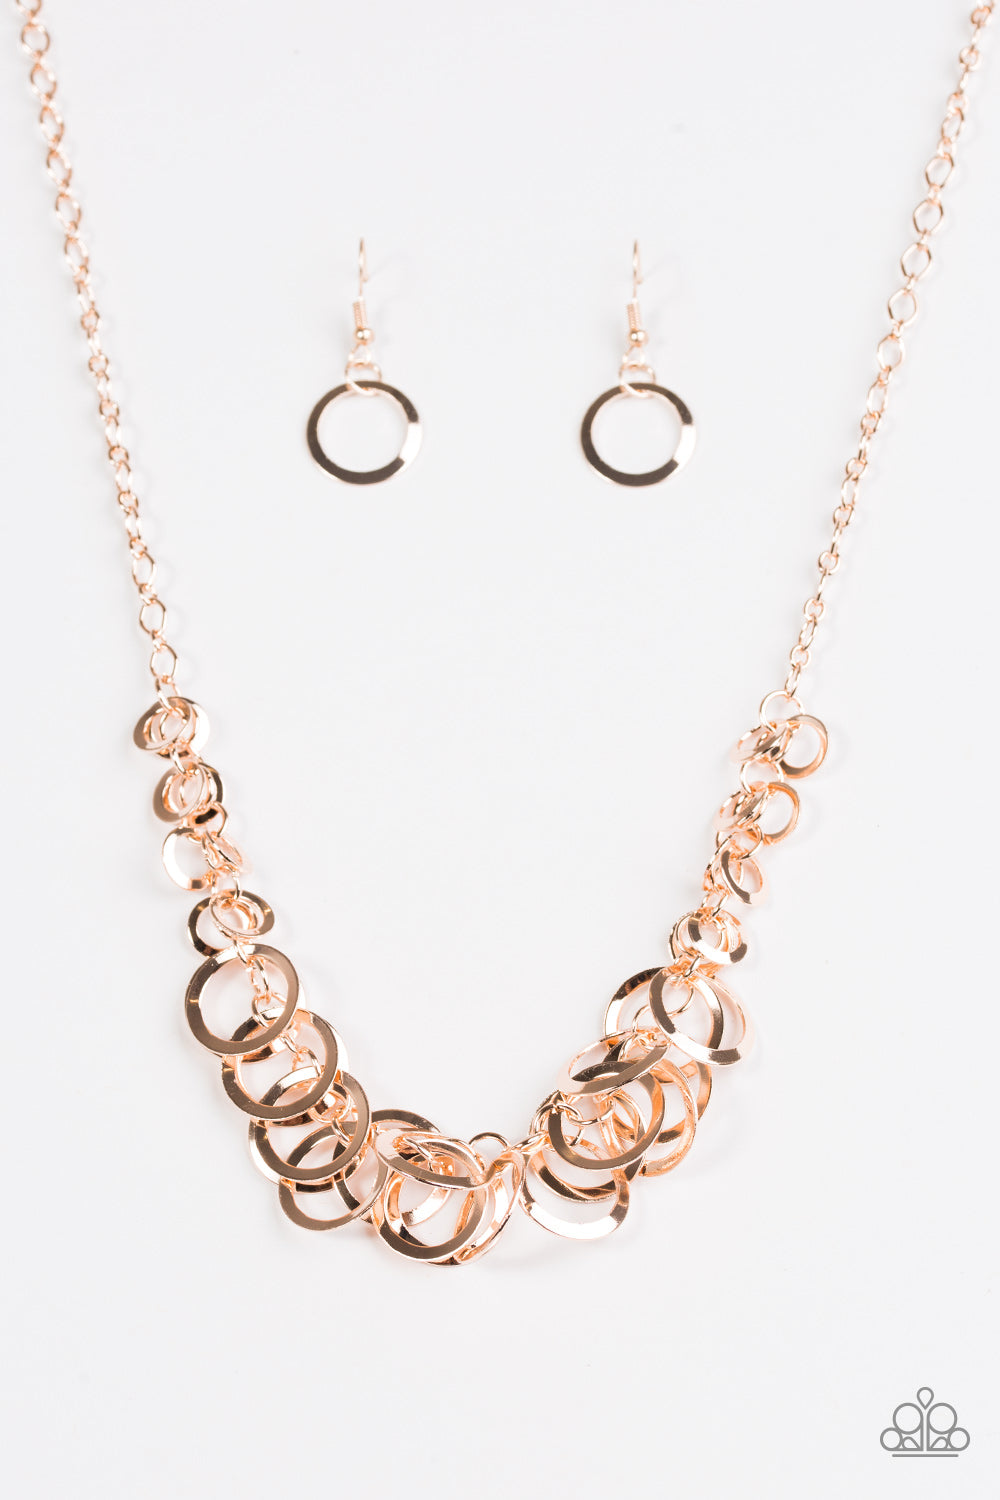 Paparazzi Accessories Royal Circus - Rose Gold  Necklace & Earrings 